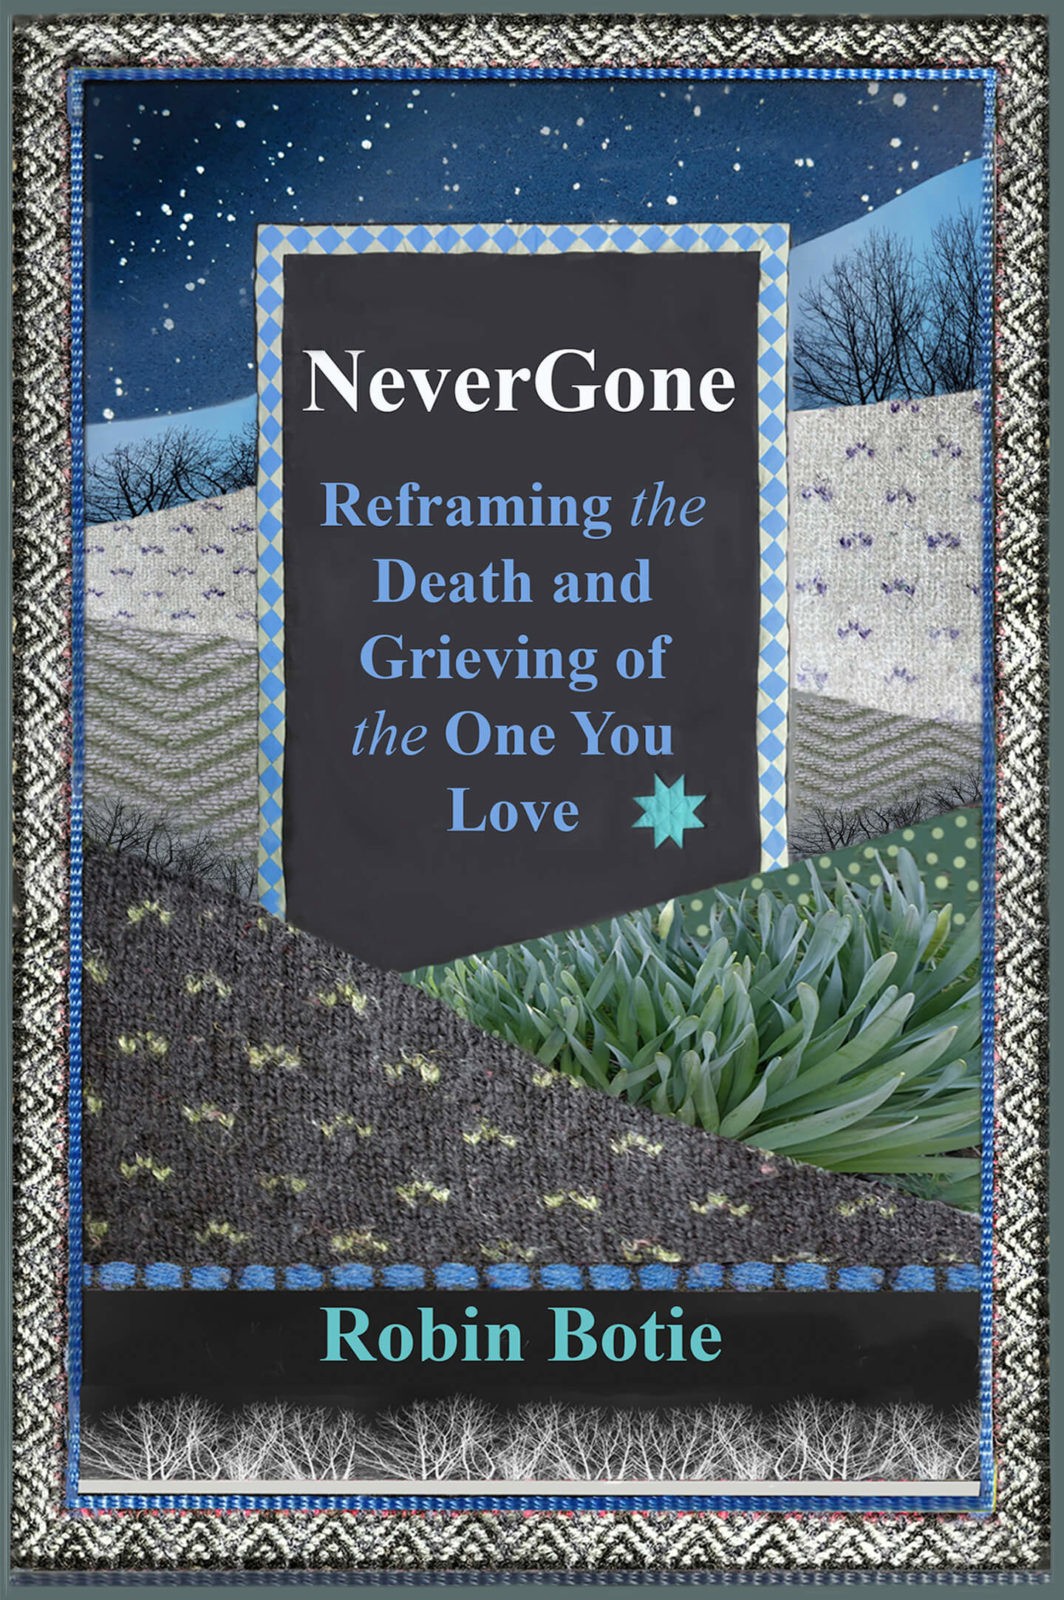 Robin Botie of Ithaca, New York, photoshops the cover of her new book of hope for the grieving.